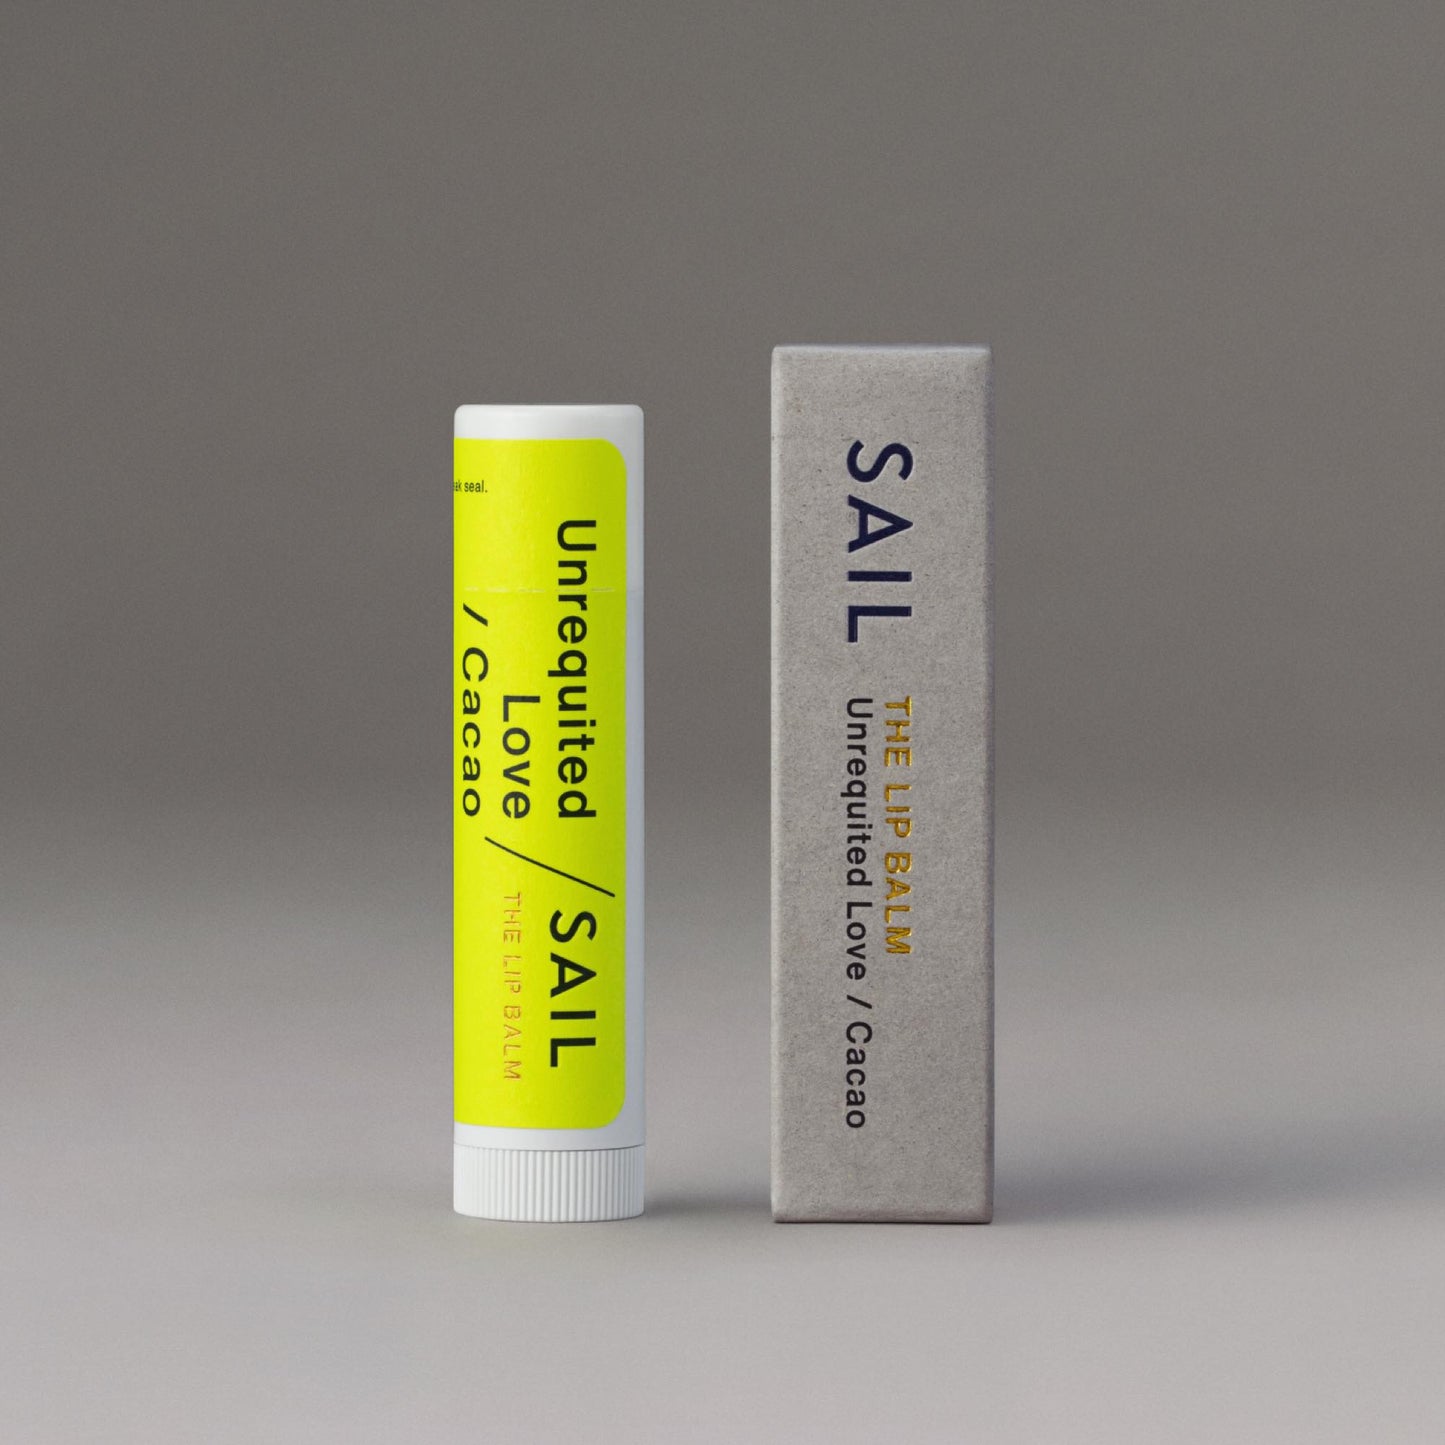 THE LIP BALM  Unrequited Love / Cacao  “SPECIAL PACKAGE” / 3.8g